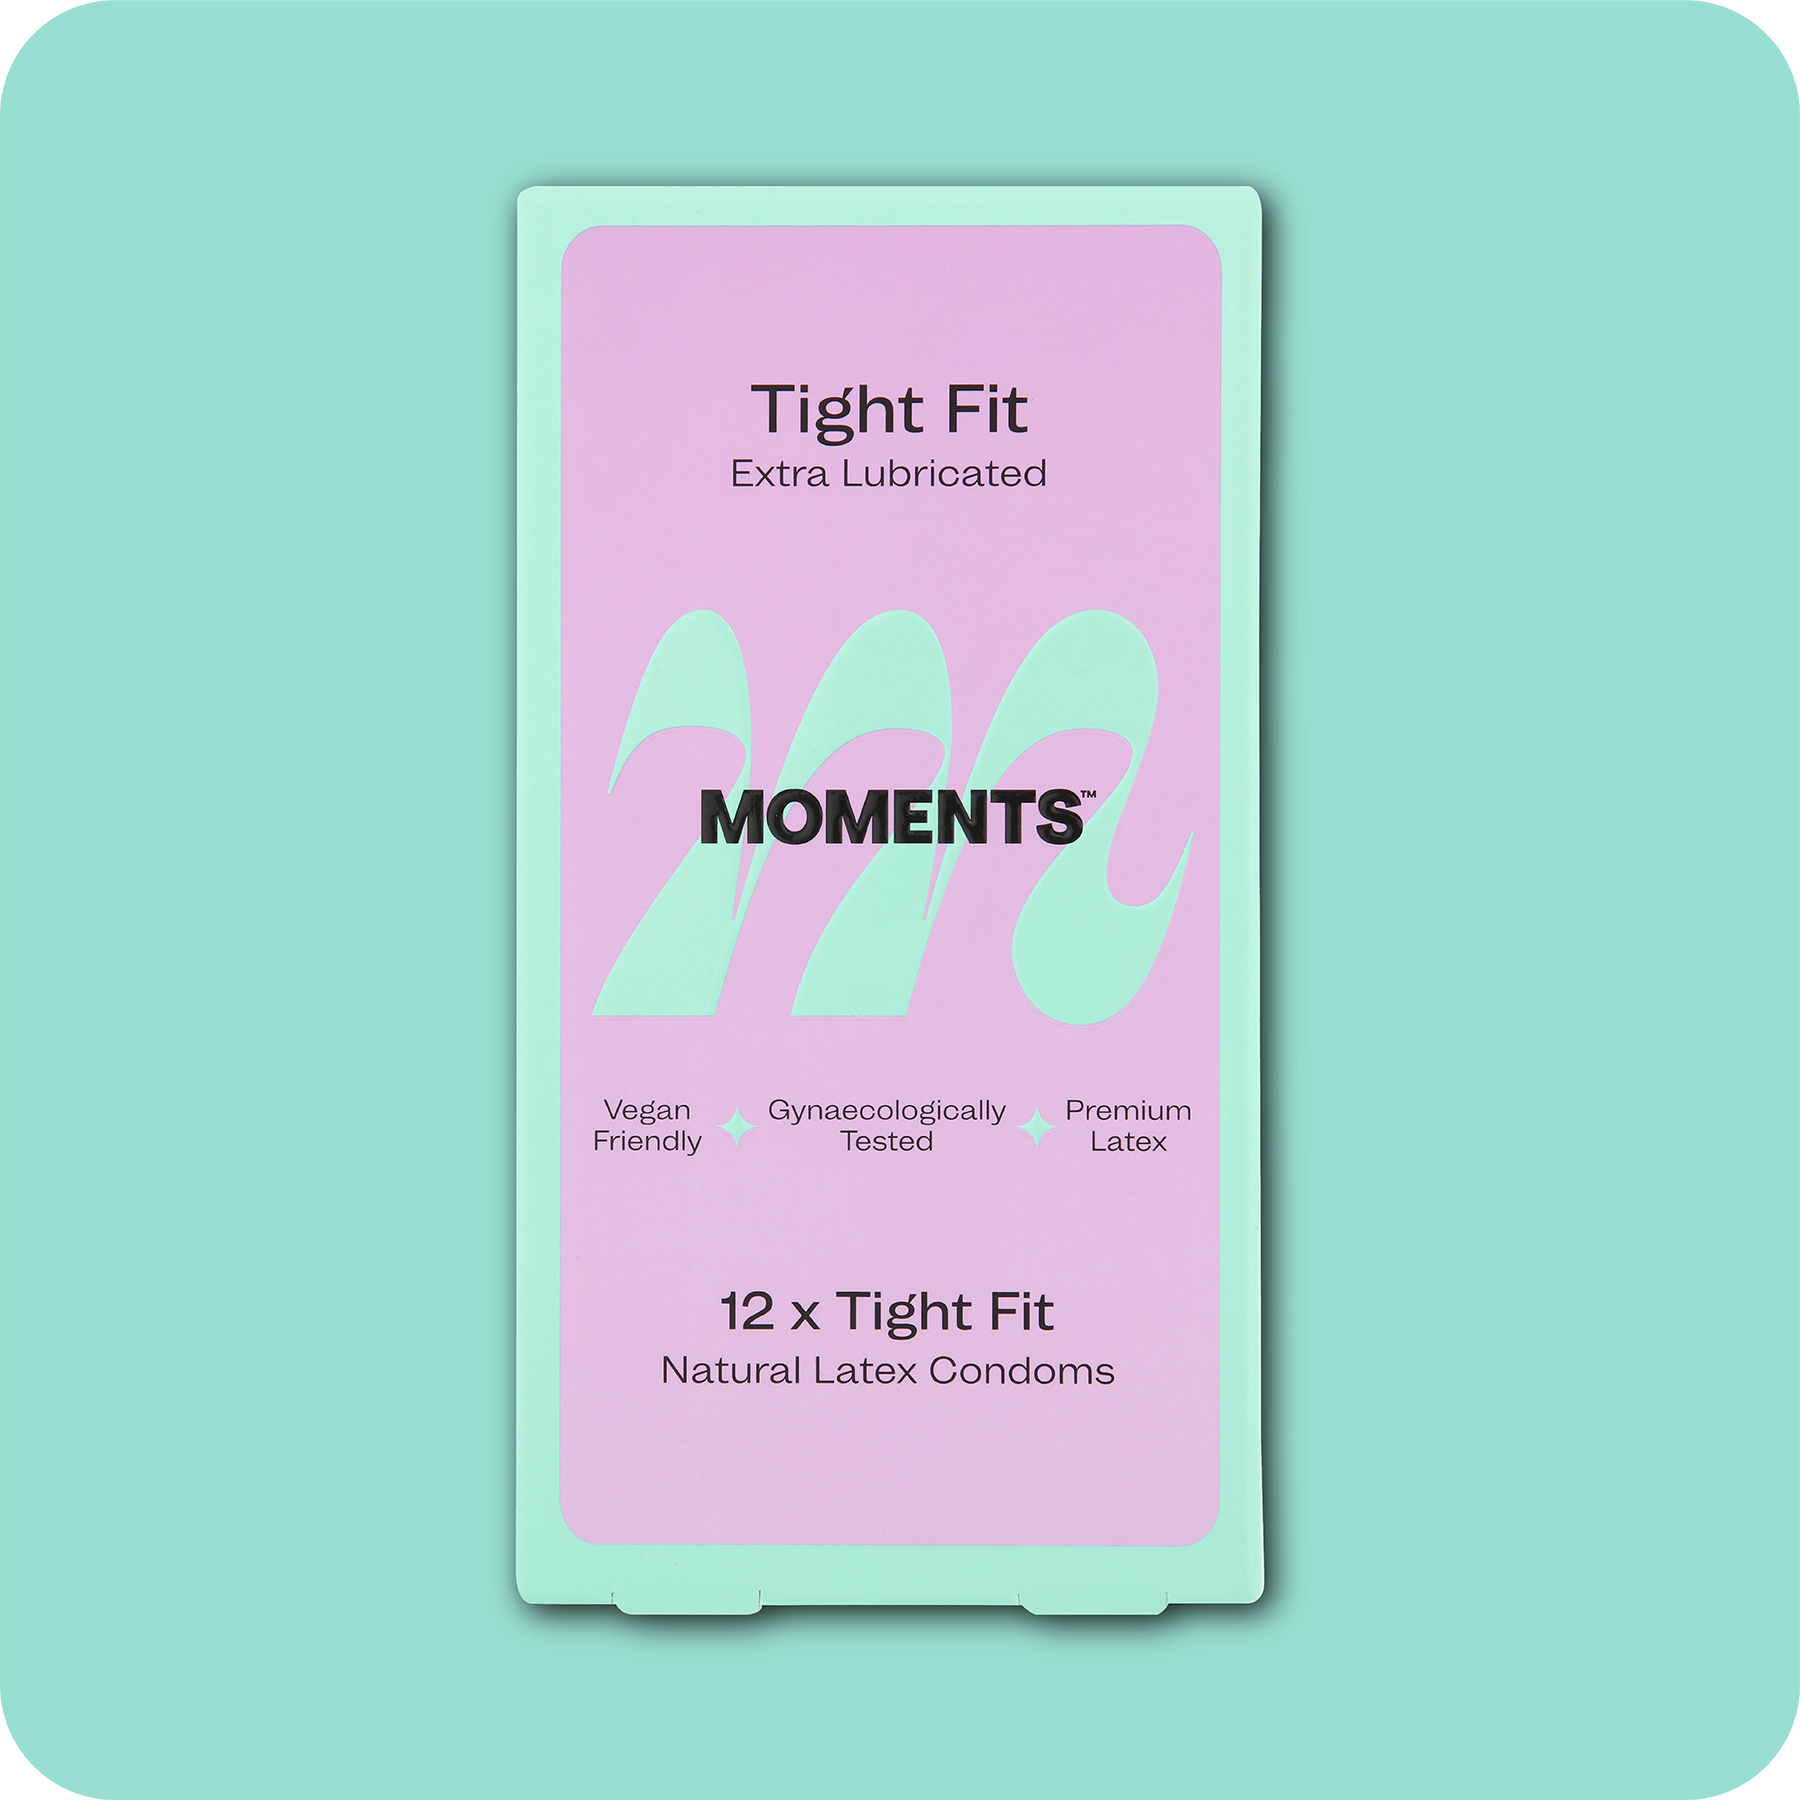 Box of Moments Tight Fit condoms with product branding